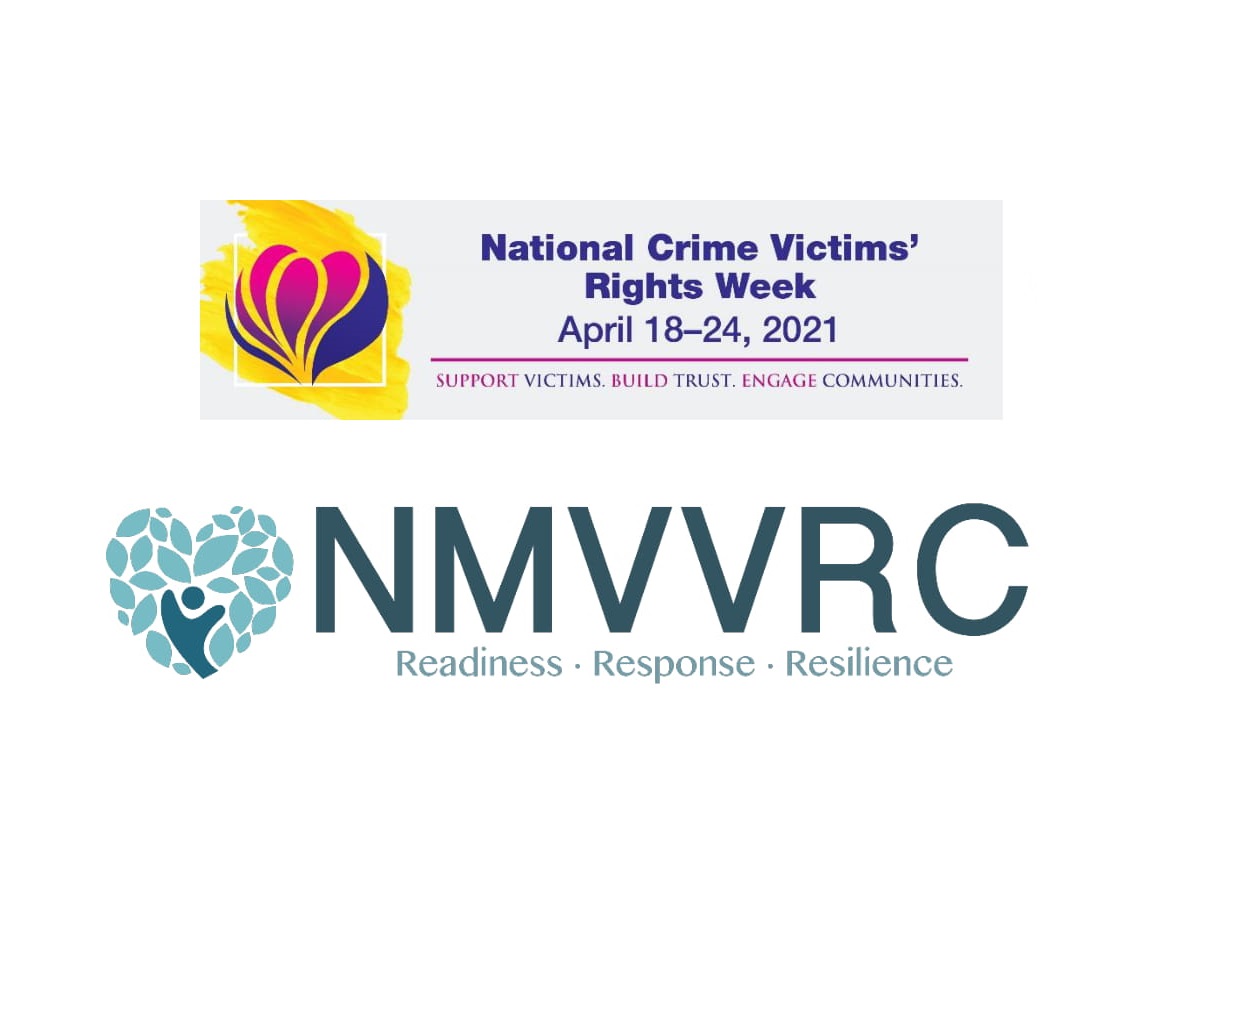 NMVVRC logo for National Crime Victims Rights Week 2021 including both the NMVVRC tagline of Readiness, Response, Resilience and the NCVR Week 2021 slogan of Support Victims, Build Trust, Engage Communities. 